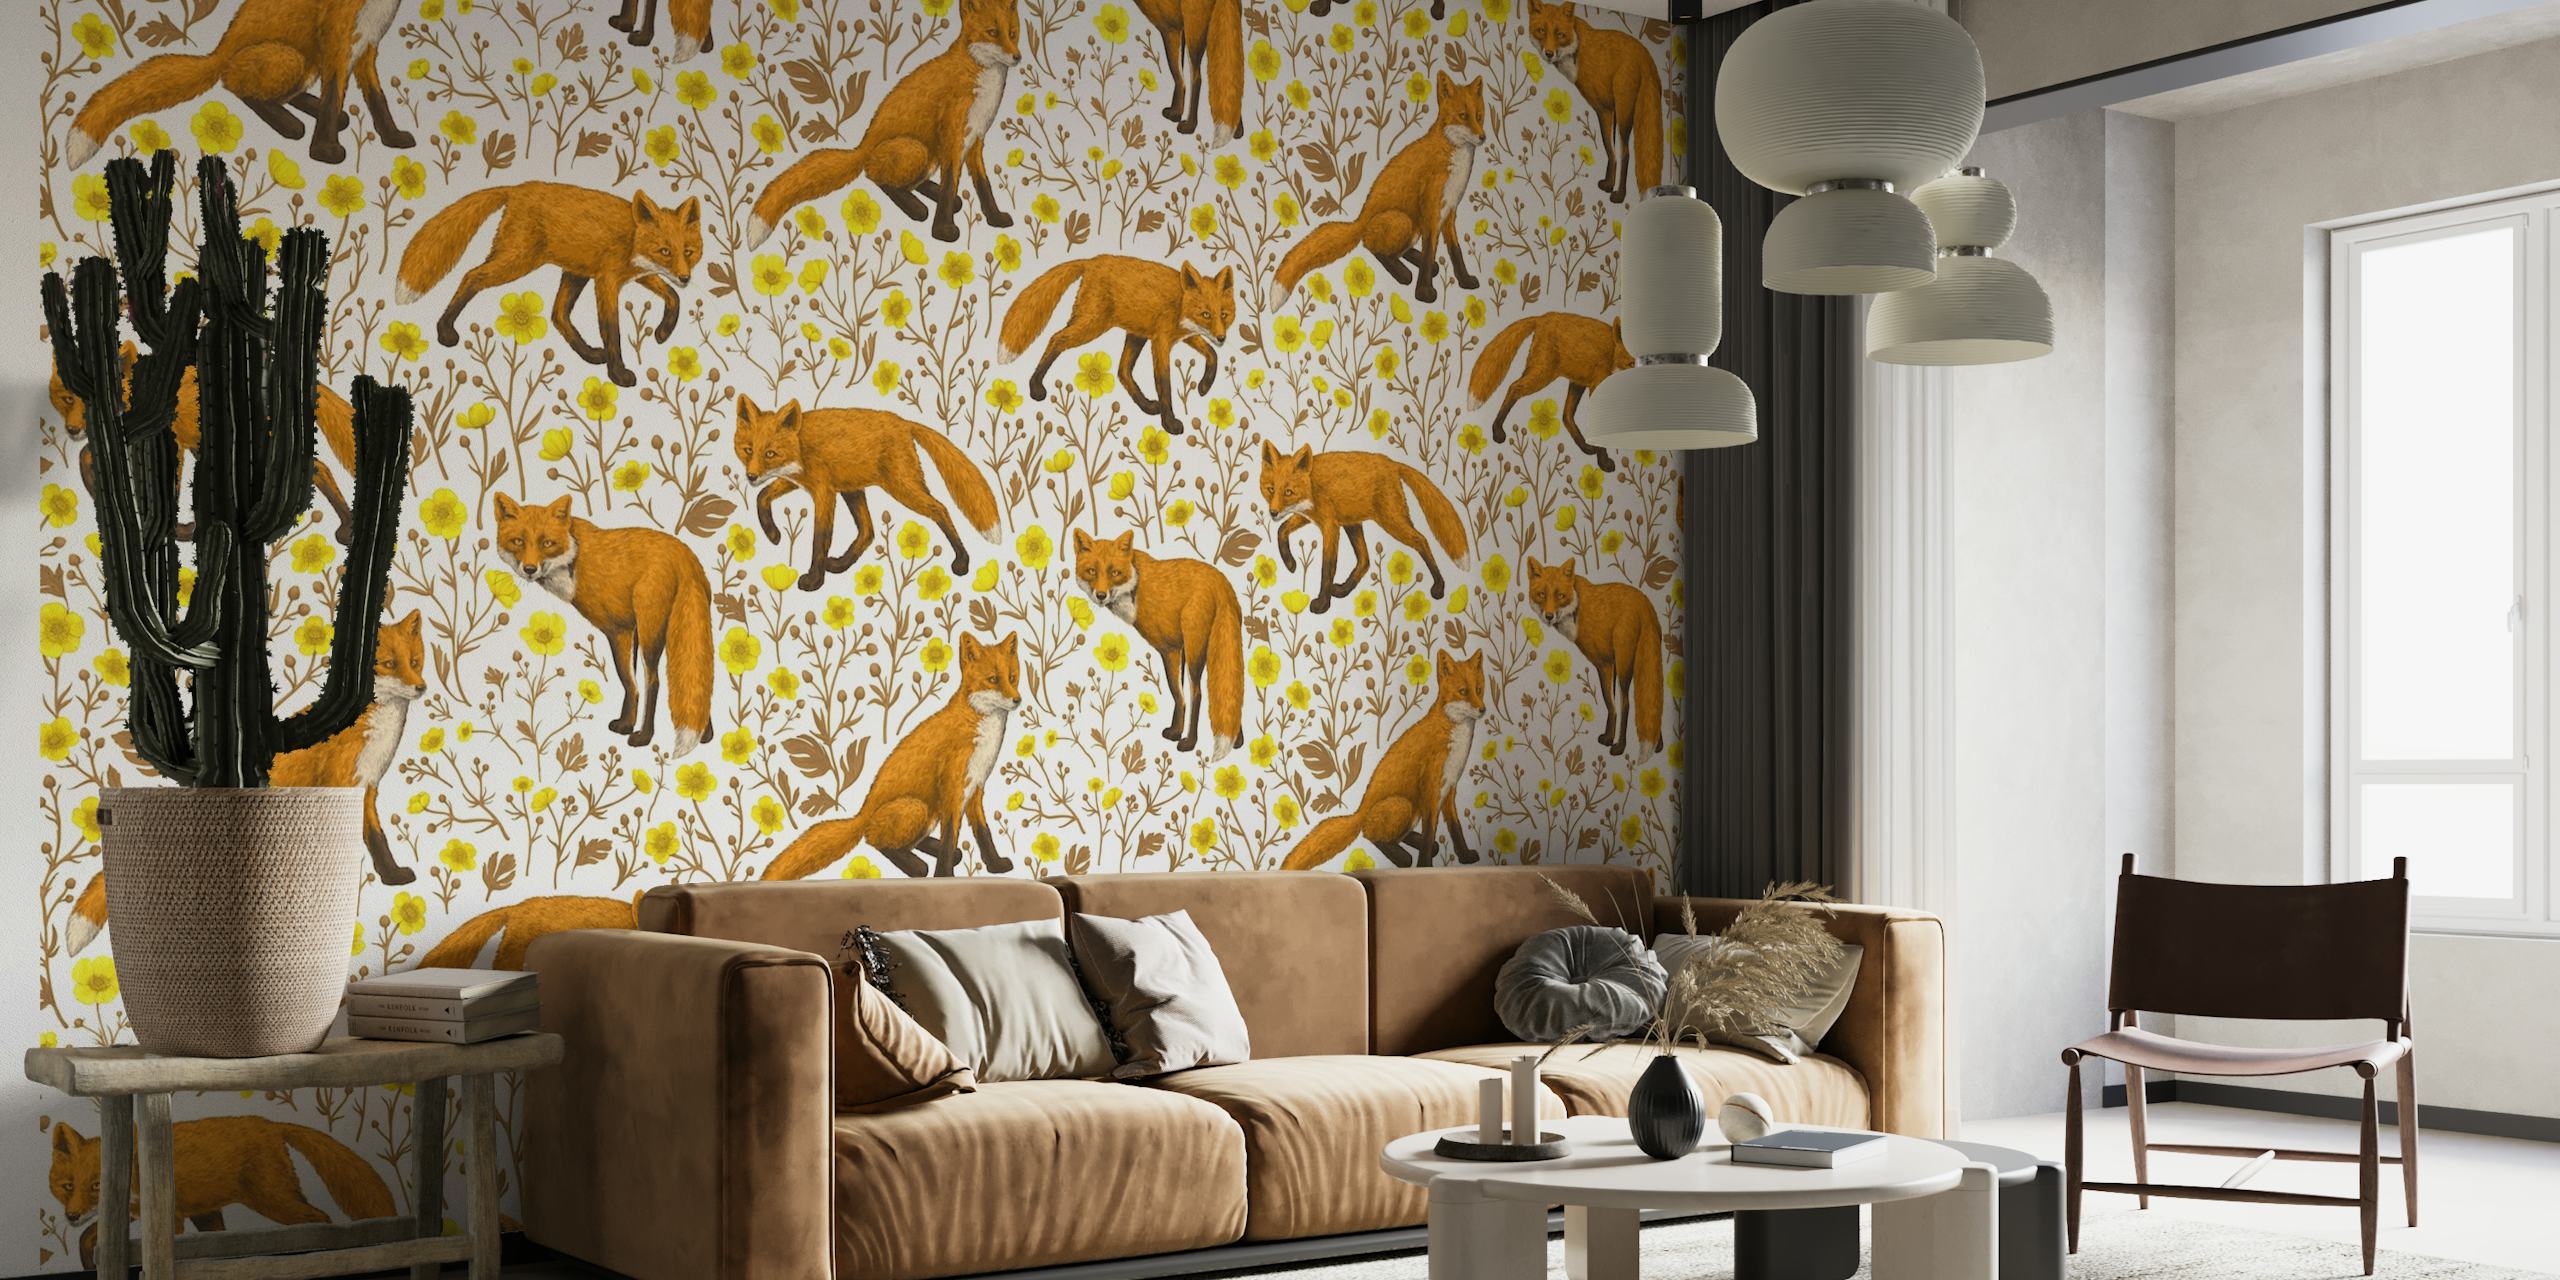 Orange foxes and yellow buttercups pattern wall mural